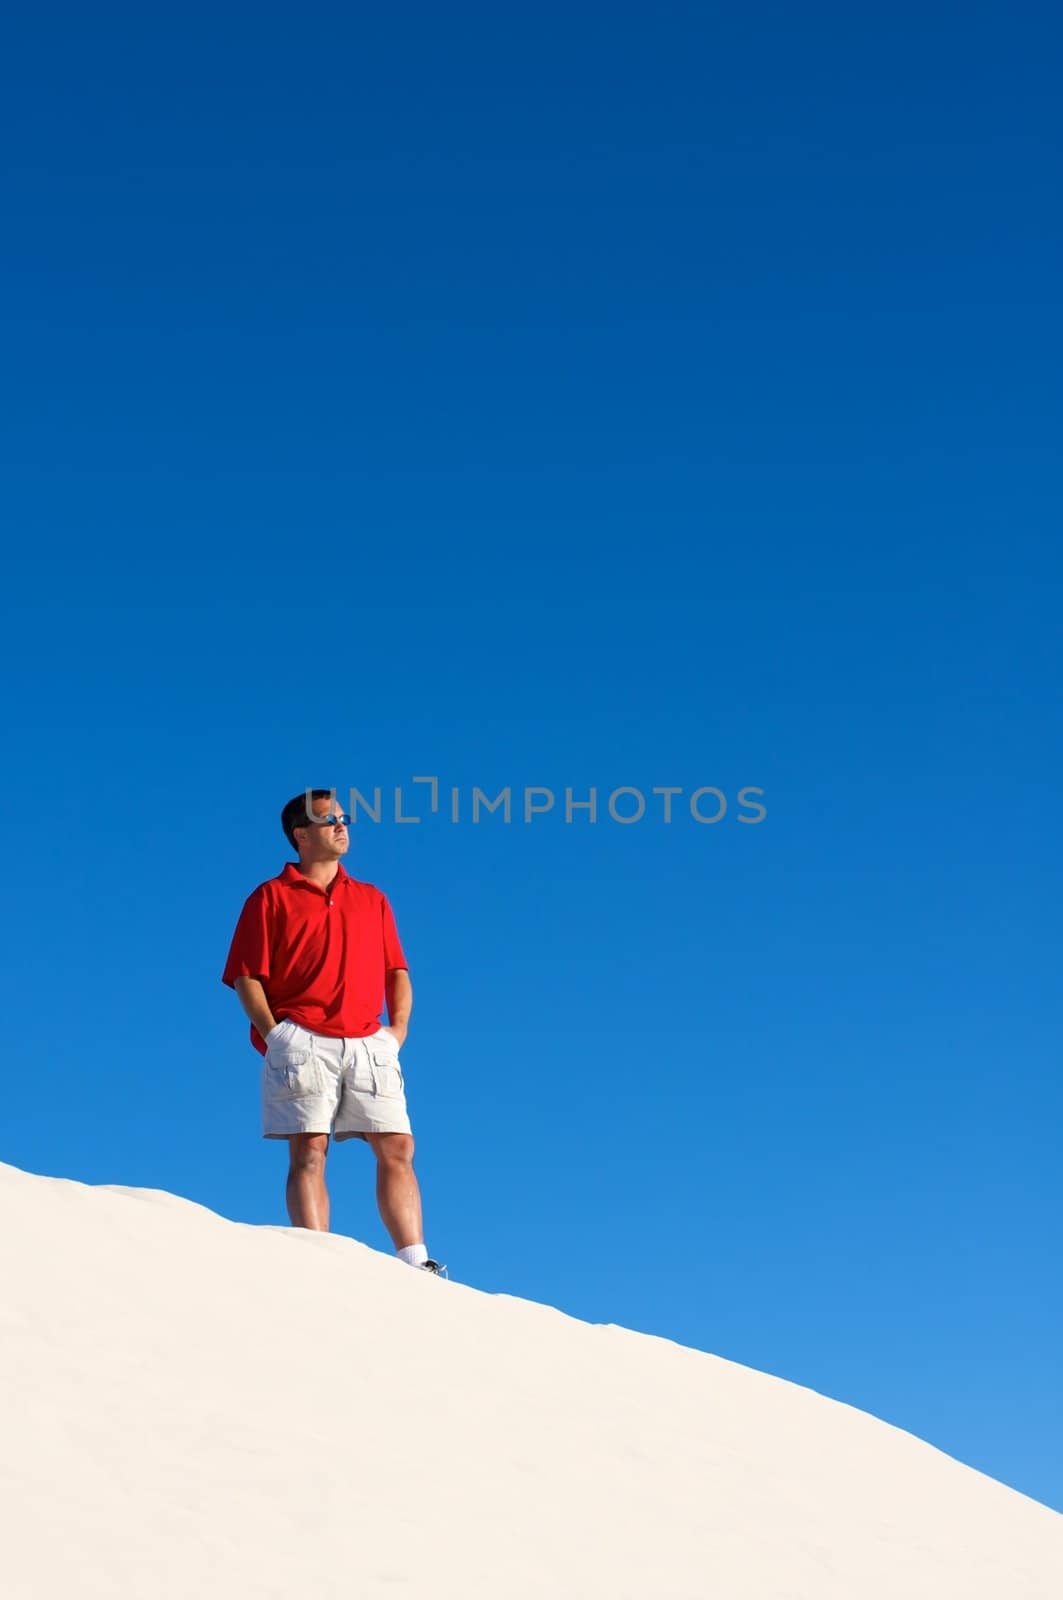 An image of a man looking out into the desert